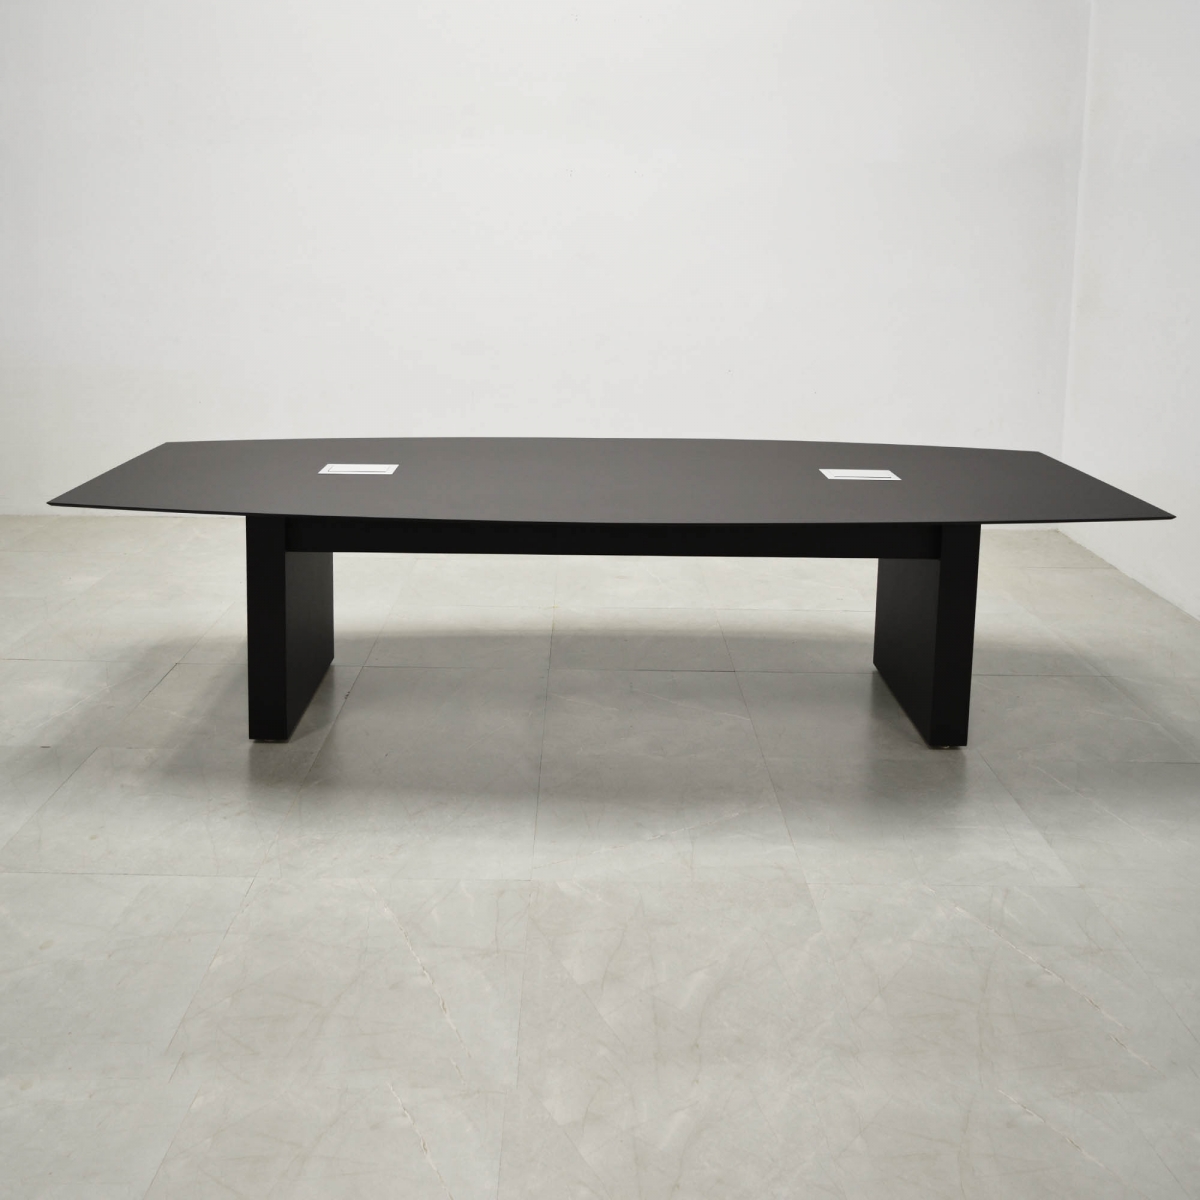 Axis Boat Shape Conference Table With Stone Top